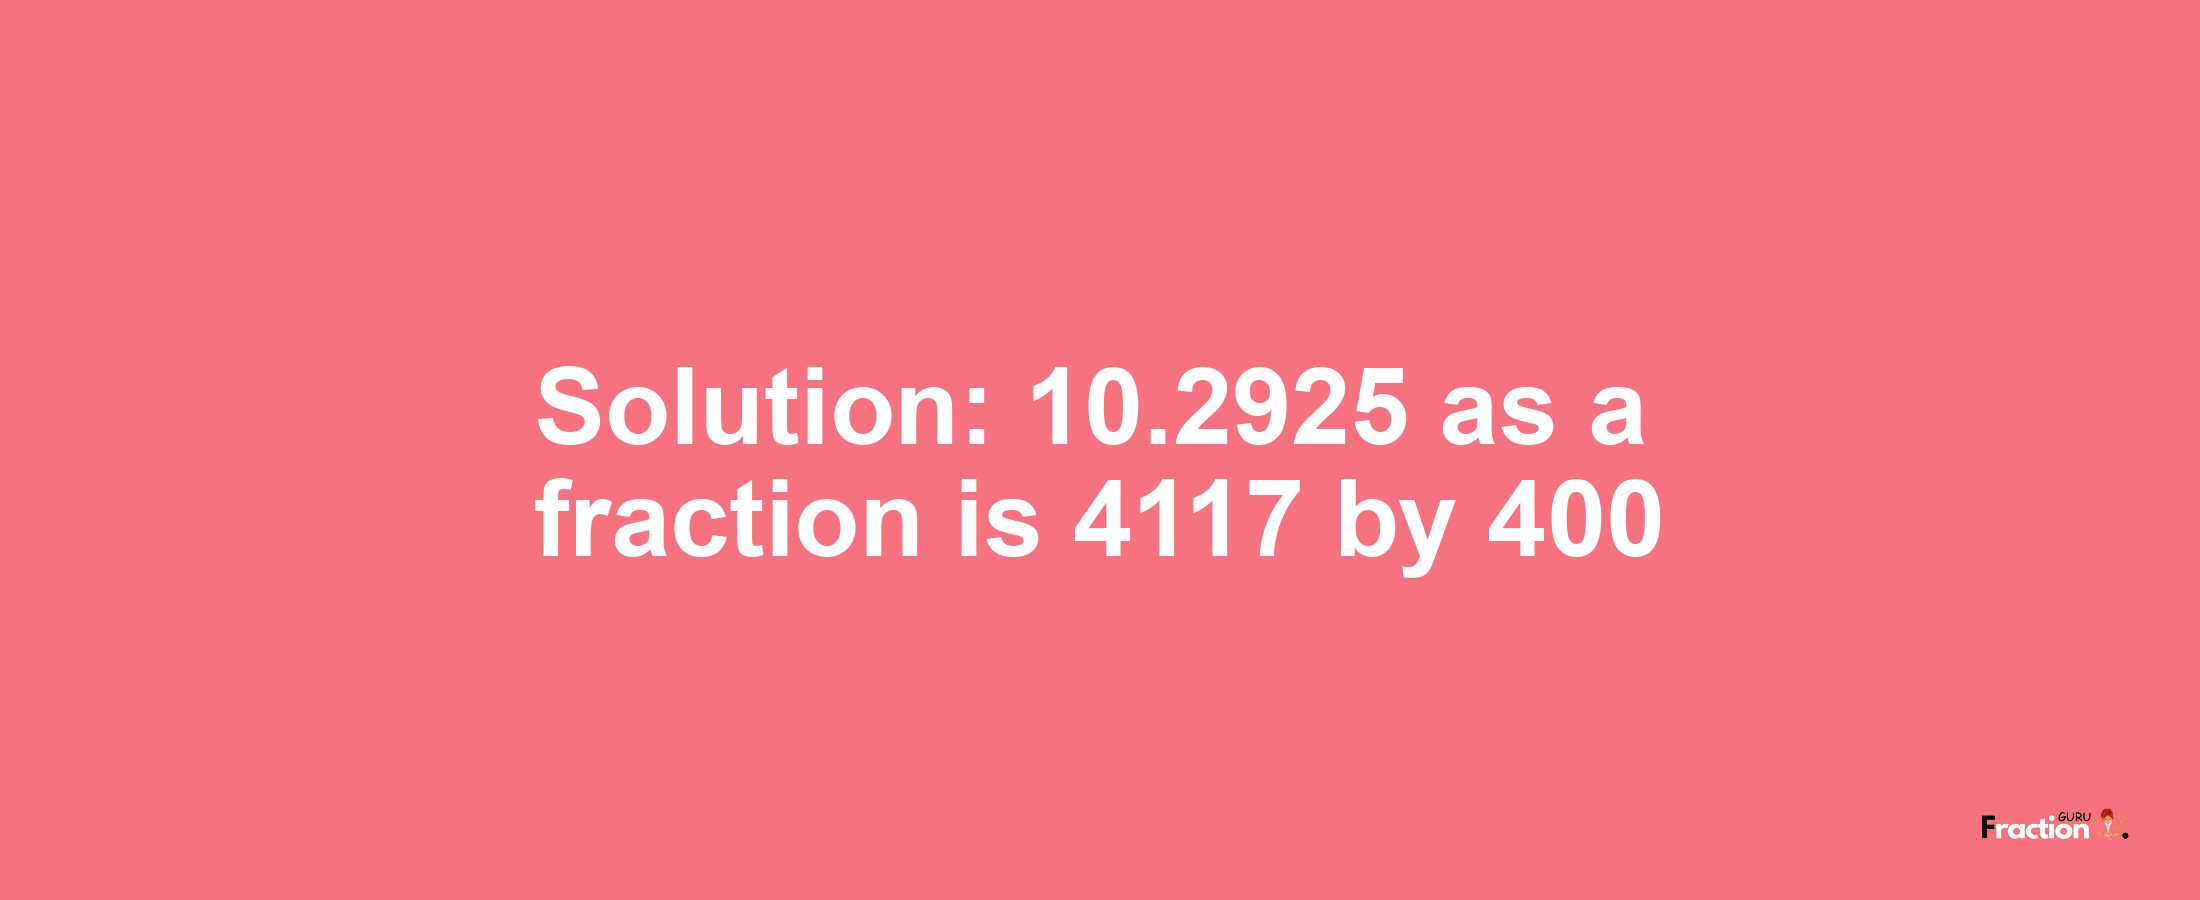 Solution:10.2925 as a fraction is 4117/400